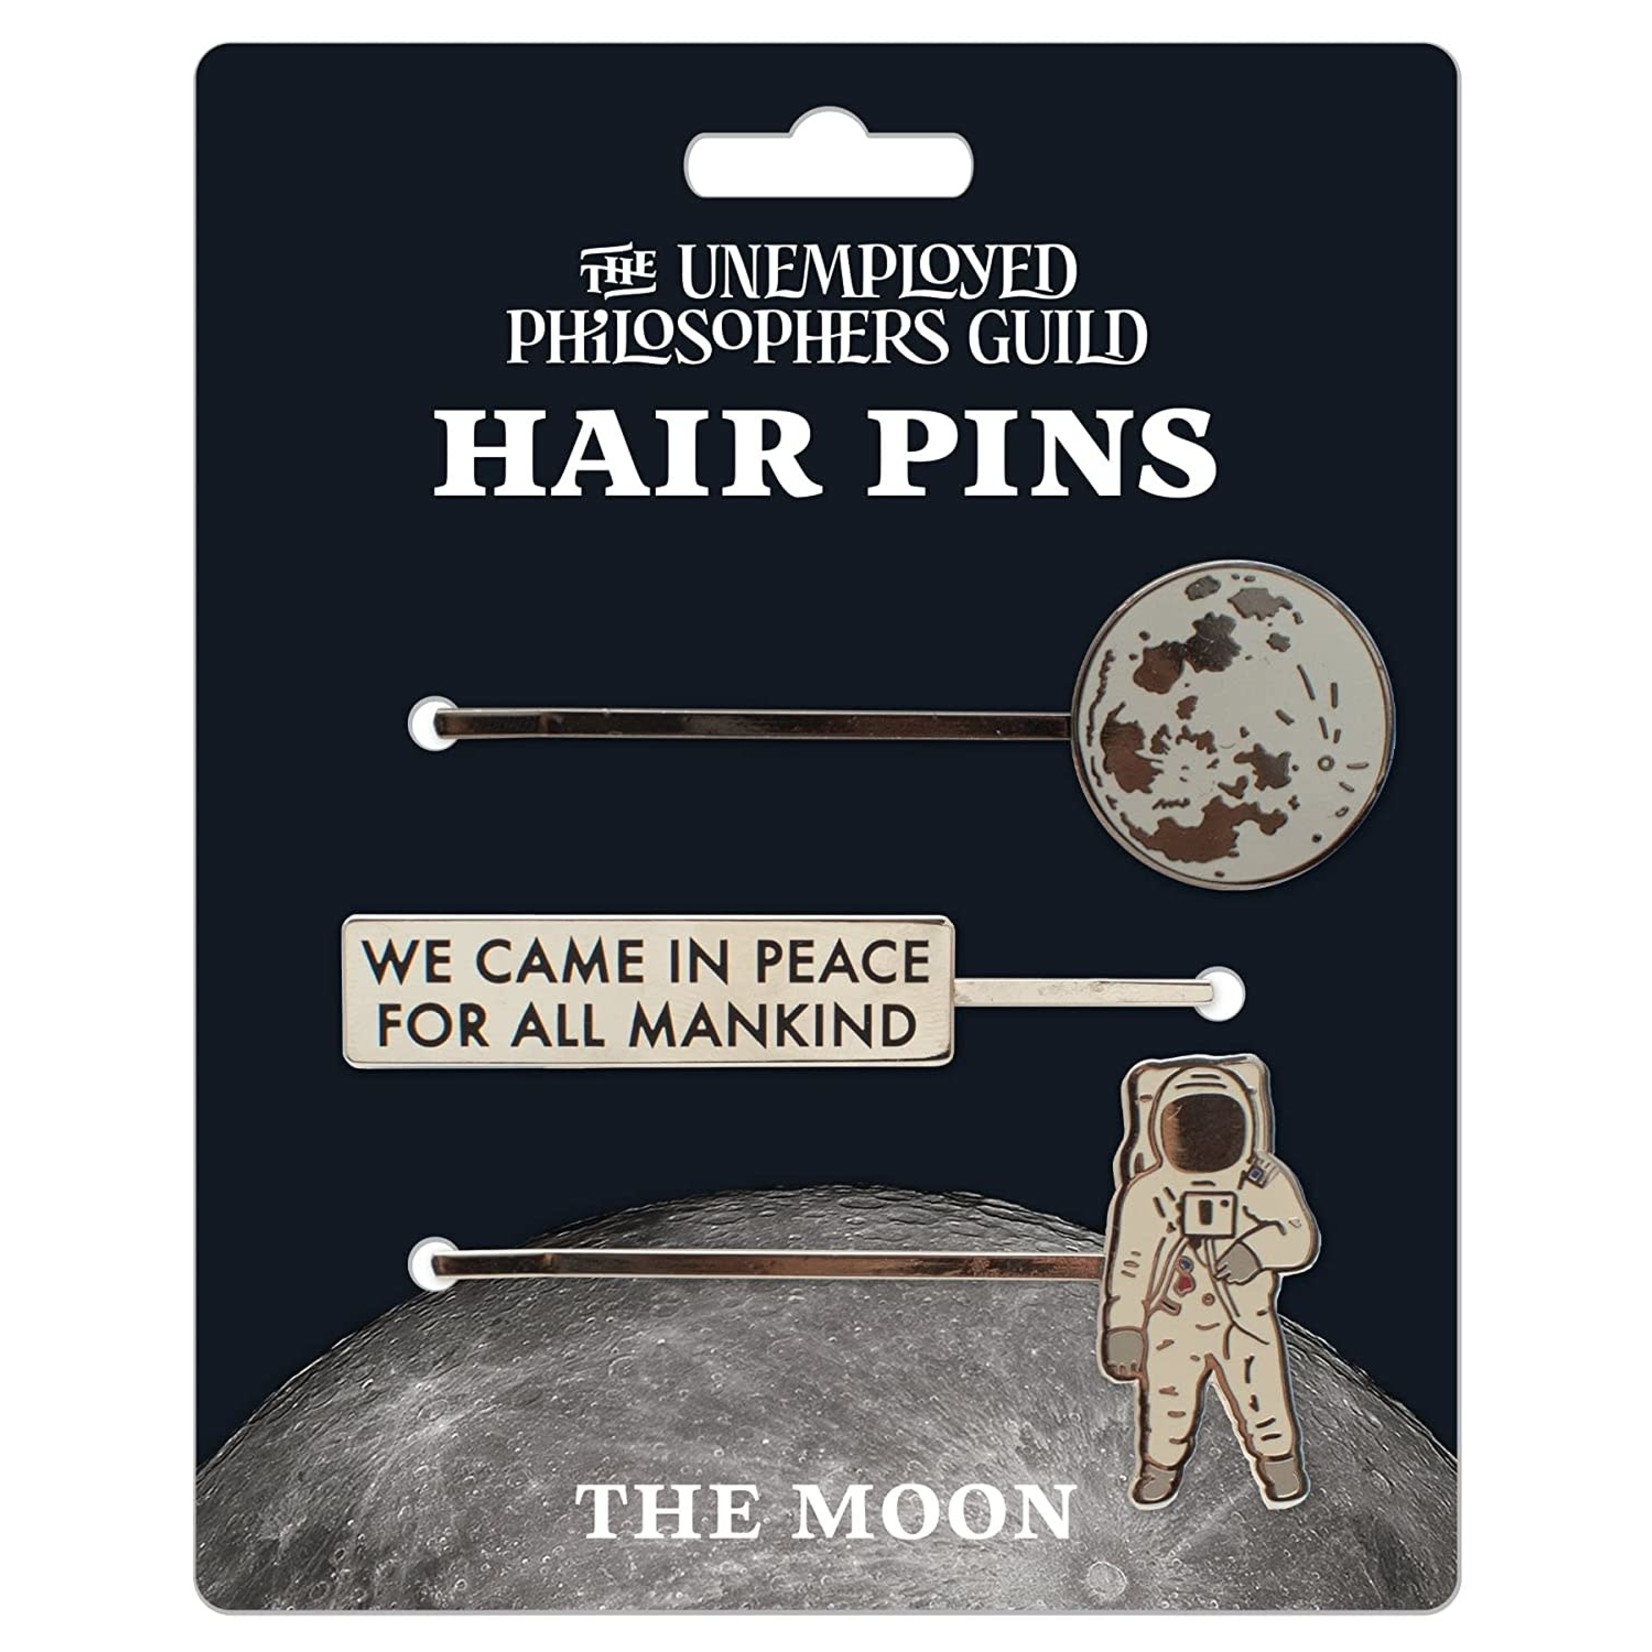 The Unemployed Philosophers Guild Hair Pins: The Moon